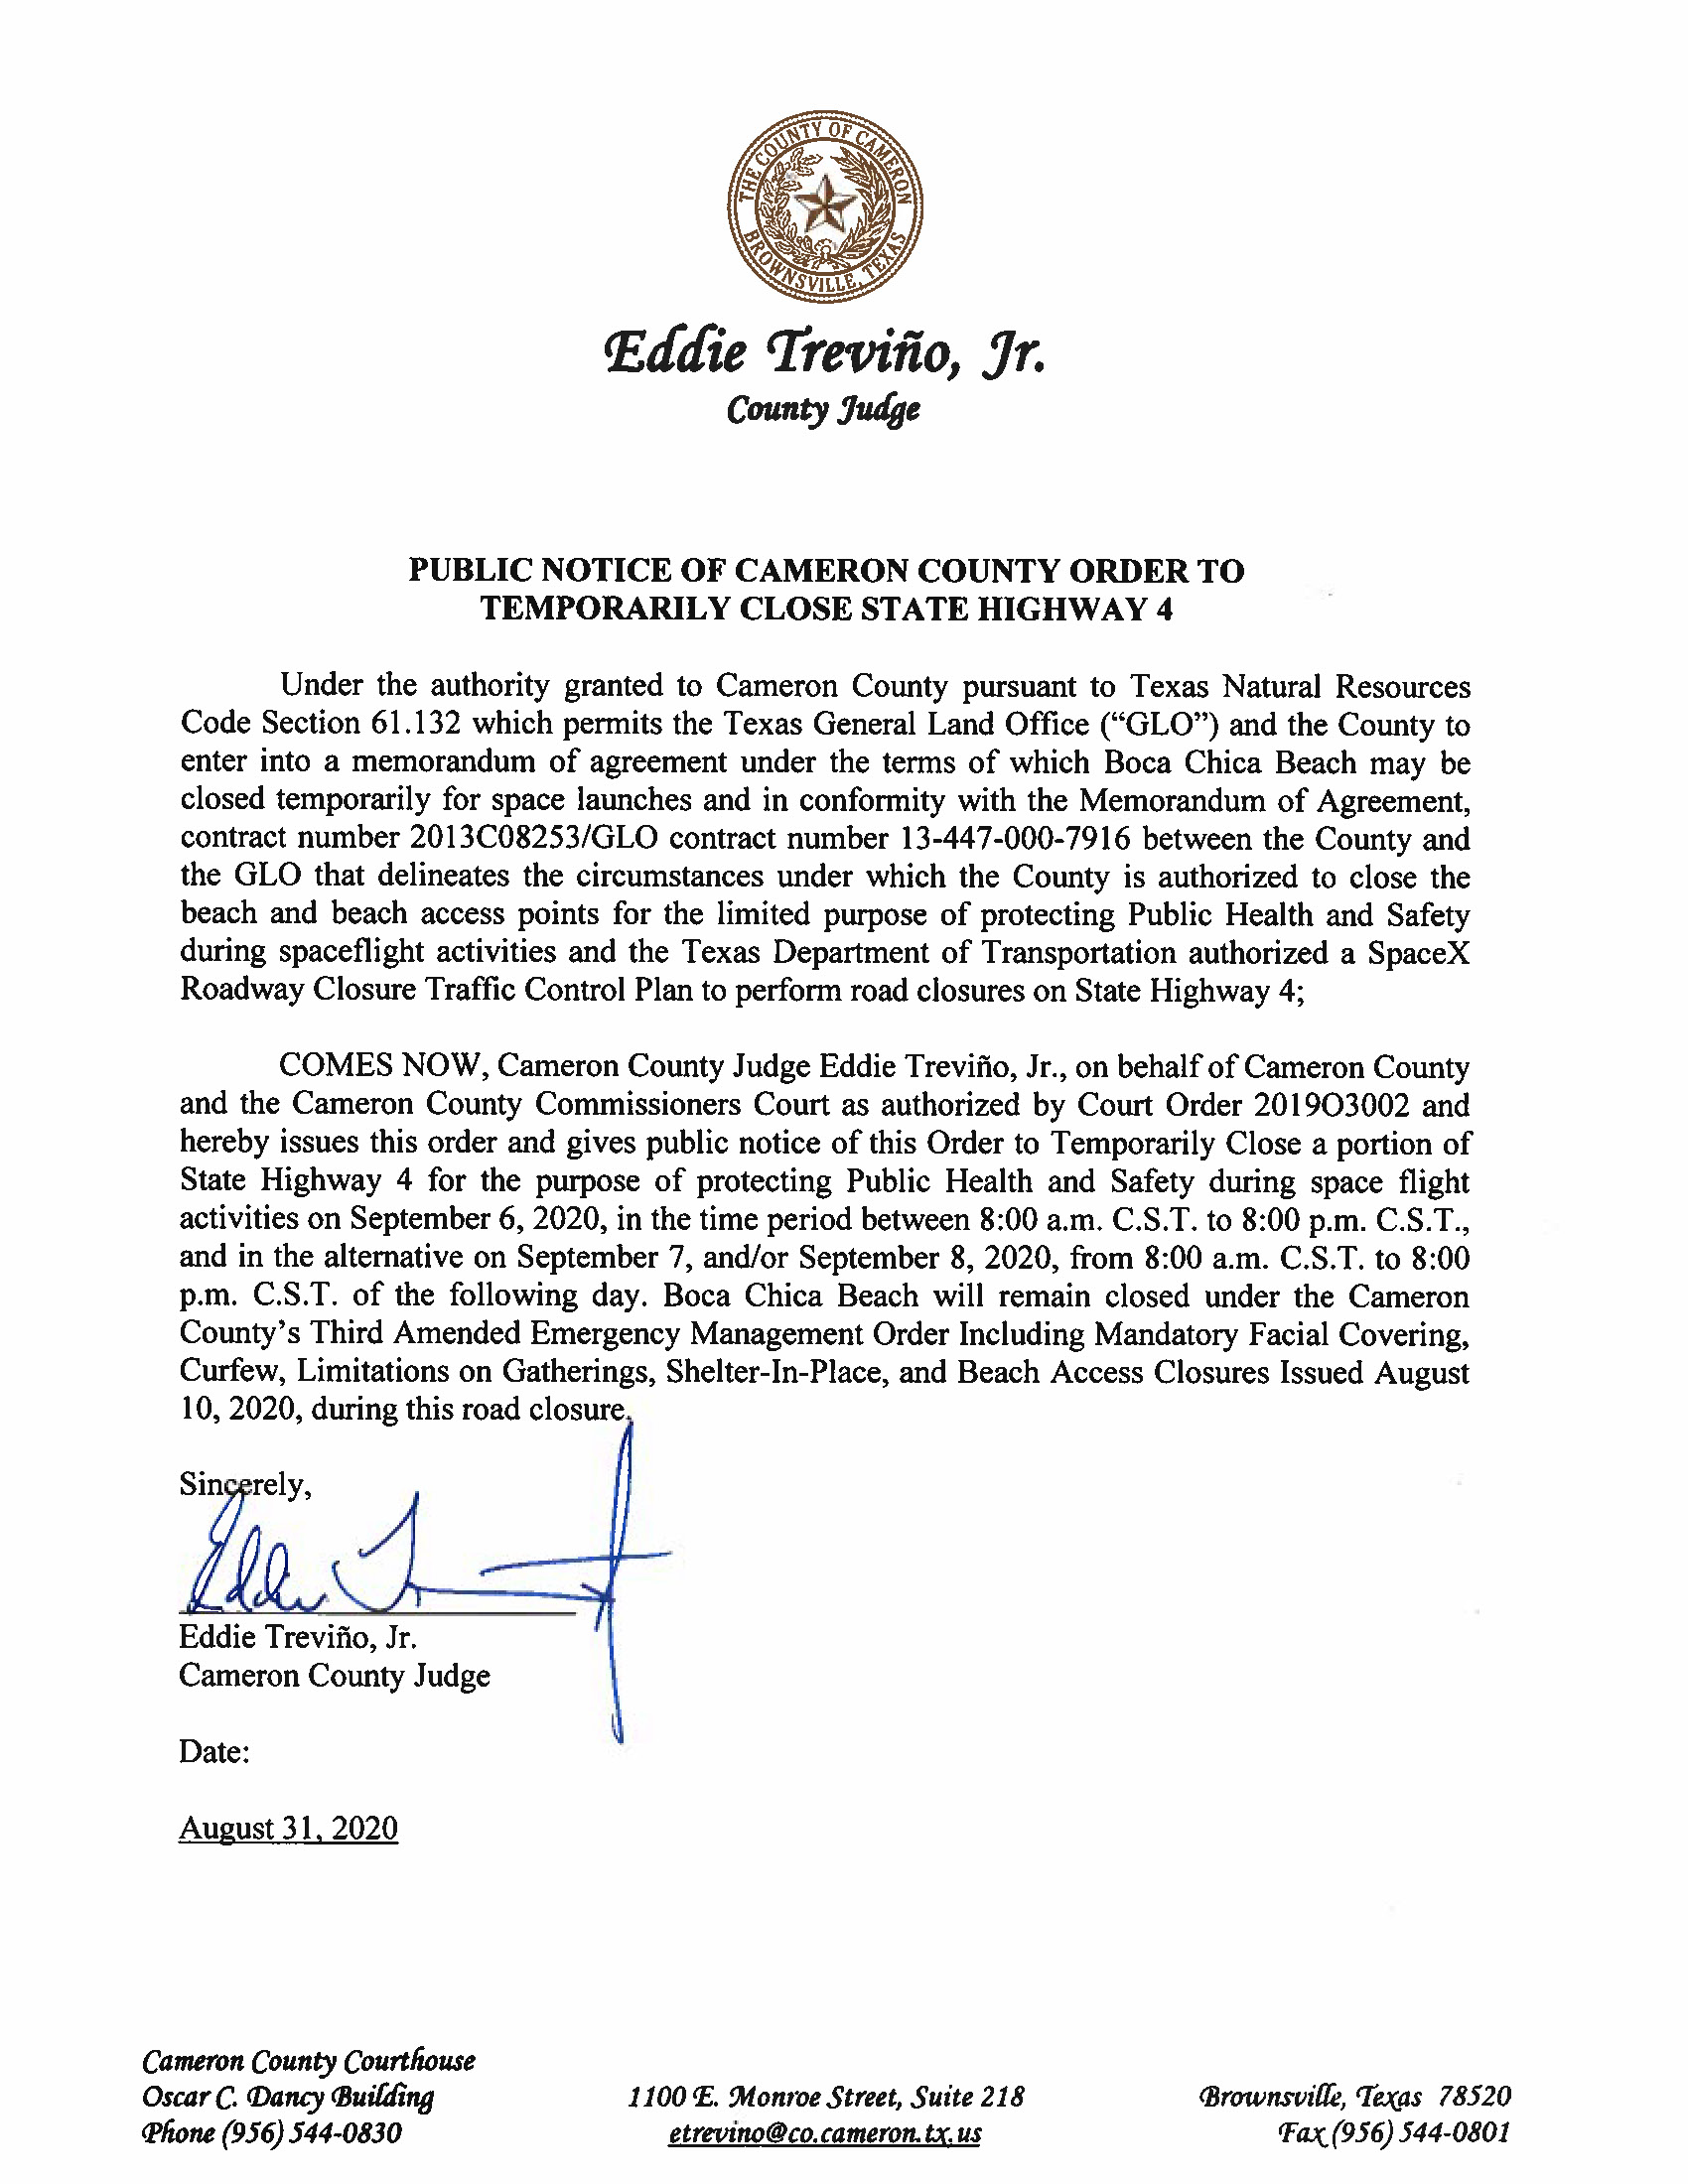 PUBLIC NOTICE OF CAMERON COUNTY ORDER TO TEMP. ROAD CLOSURE. 09.06.20.docx Page 1